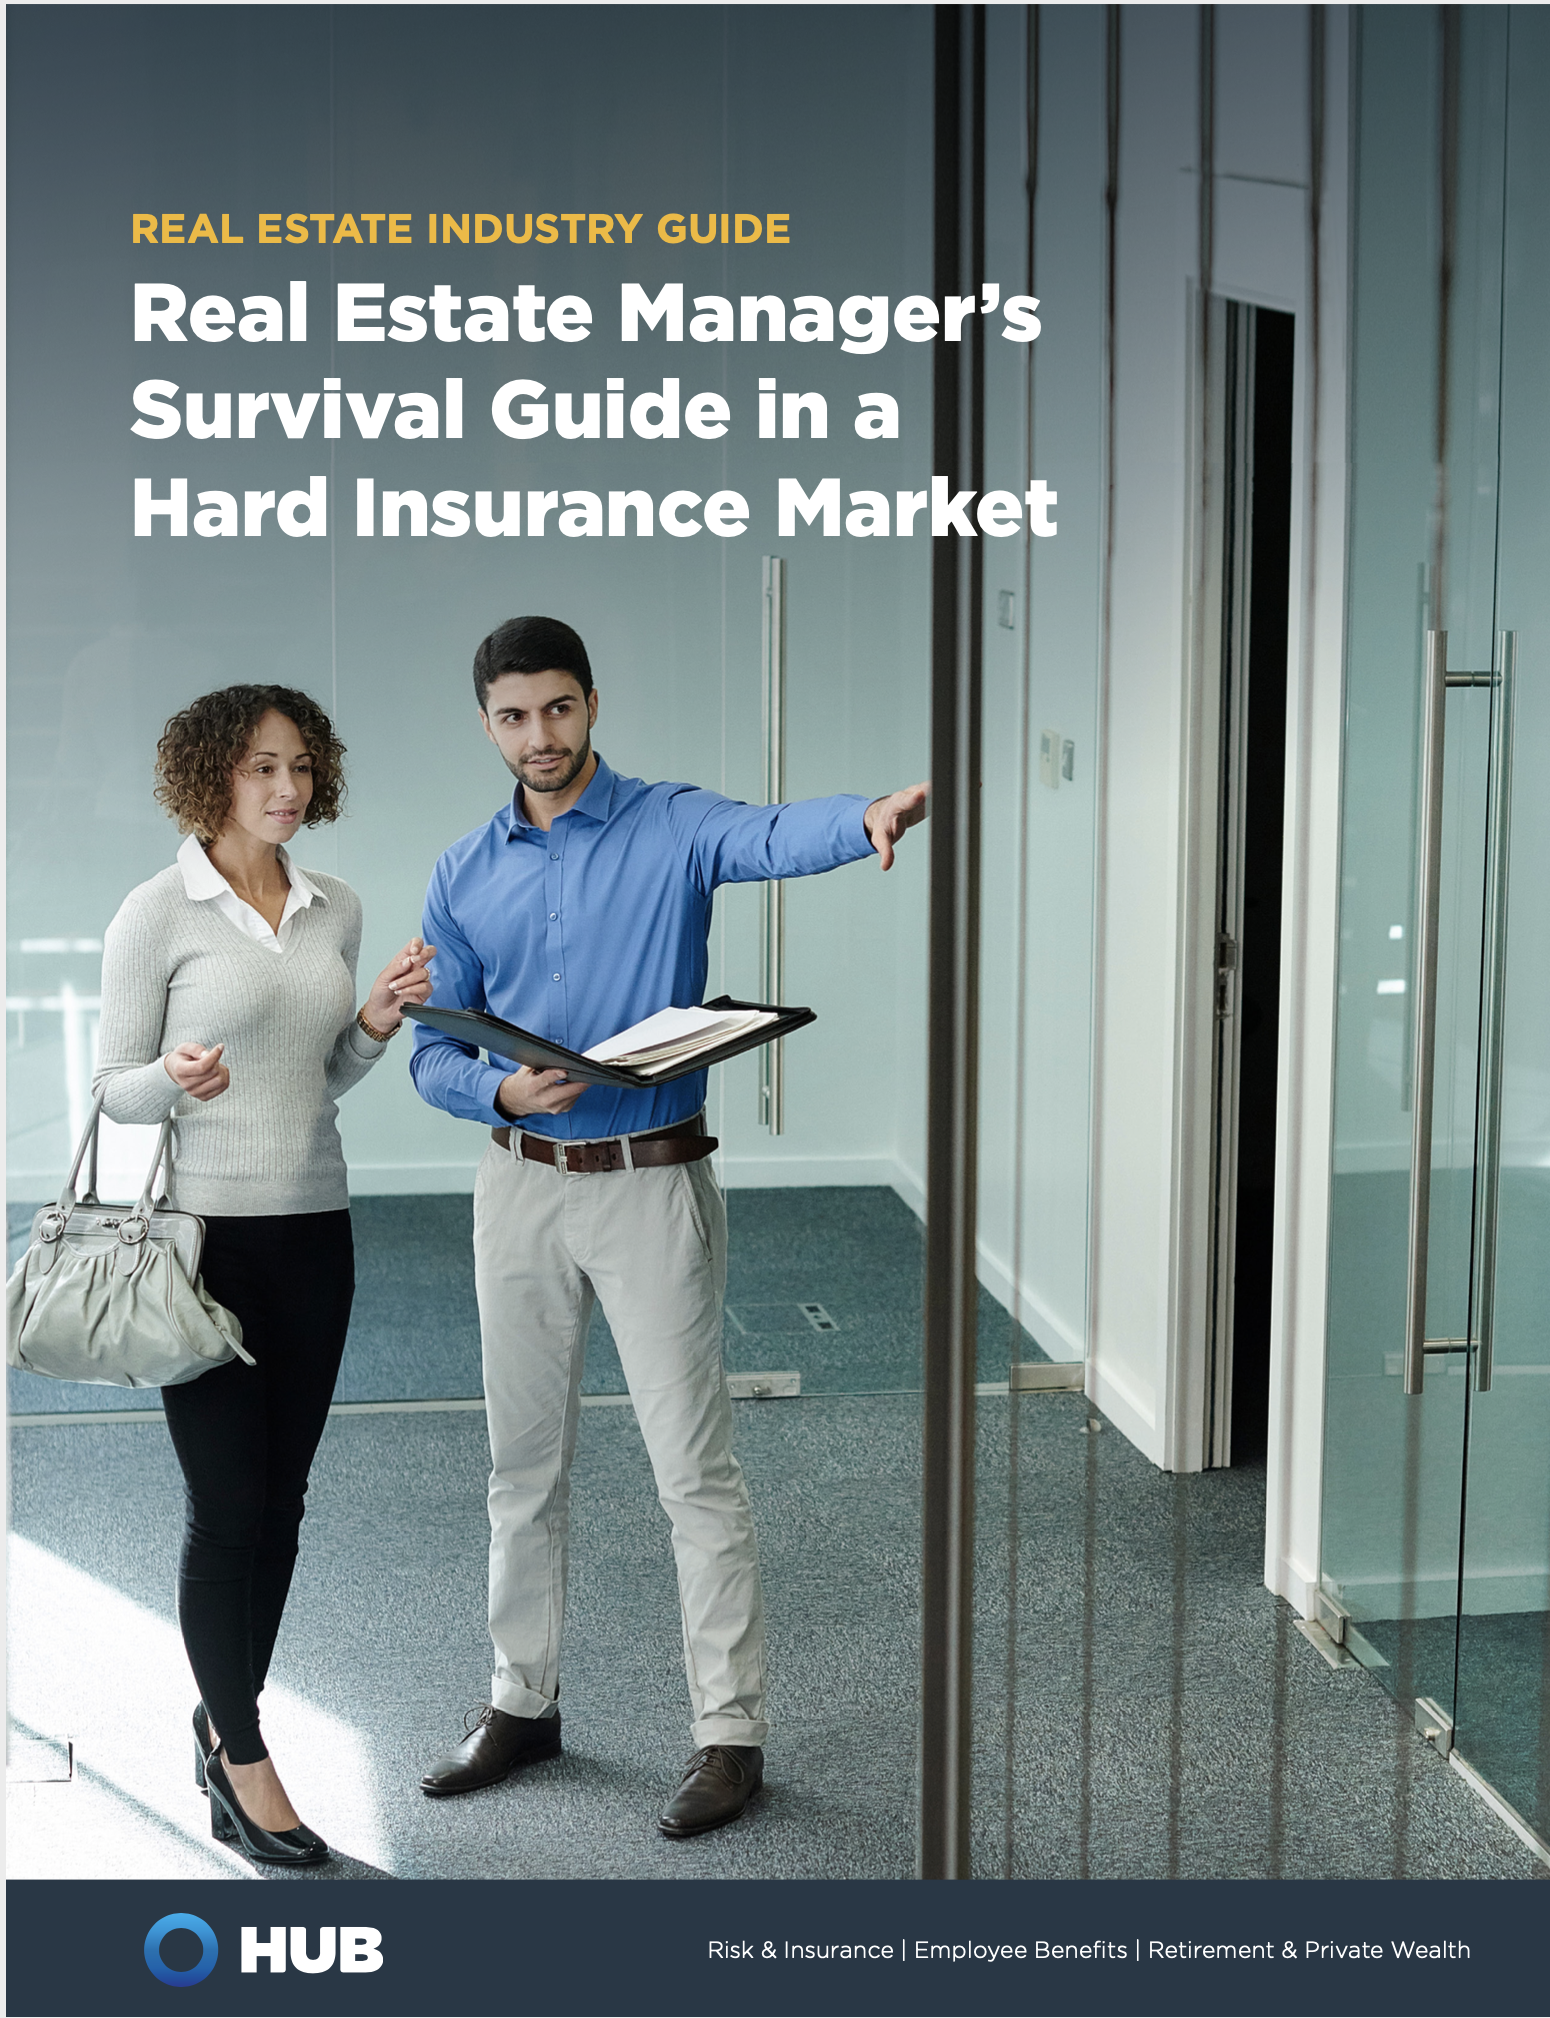 Real Estate Manager's Survival Guide in a Hard Insurance Market